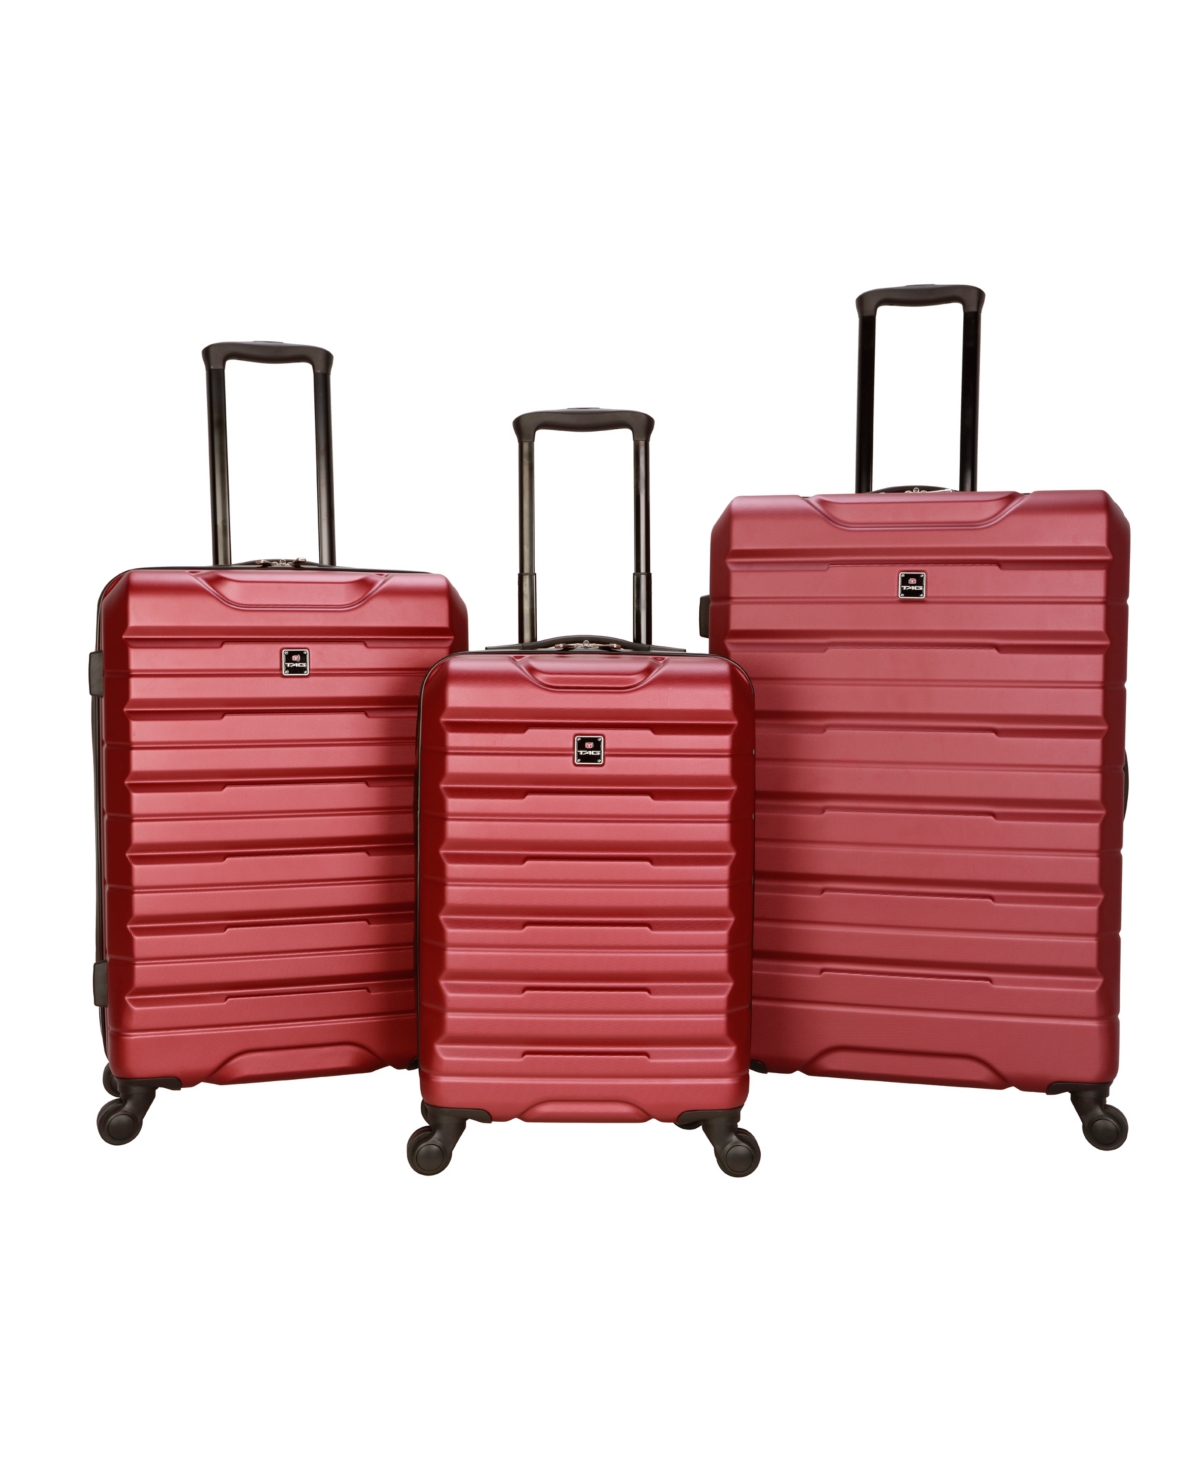 Tag Gateway 3 Piece Hardside Luggage Set In Deep Red